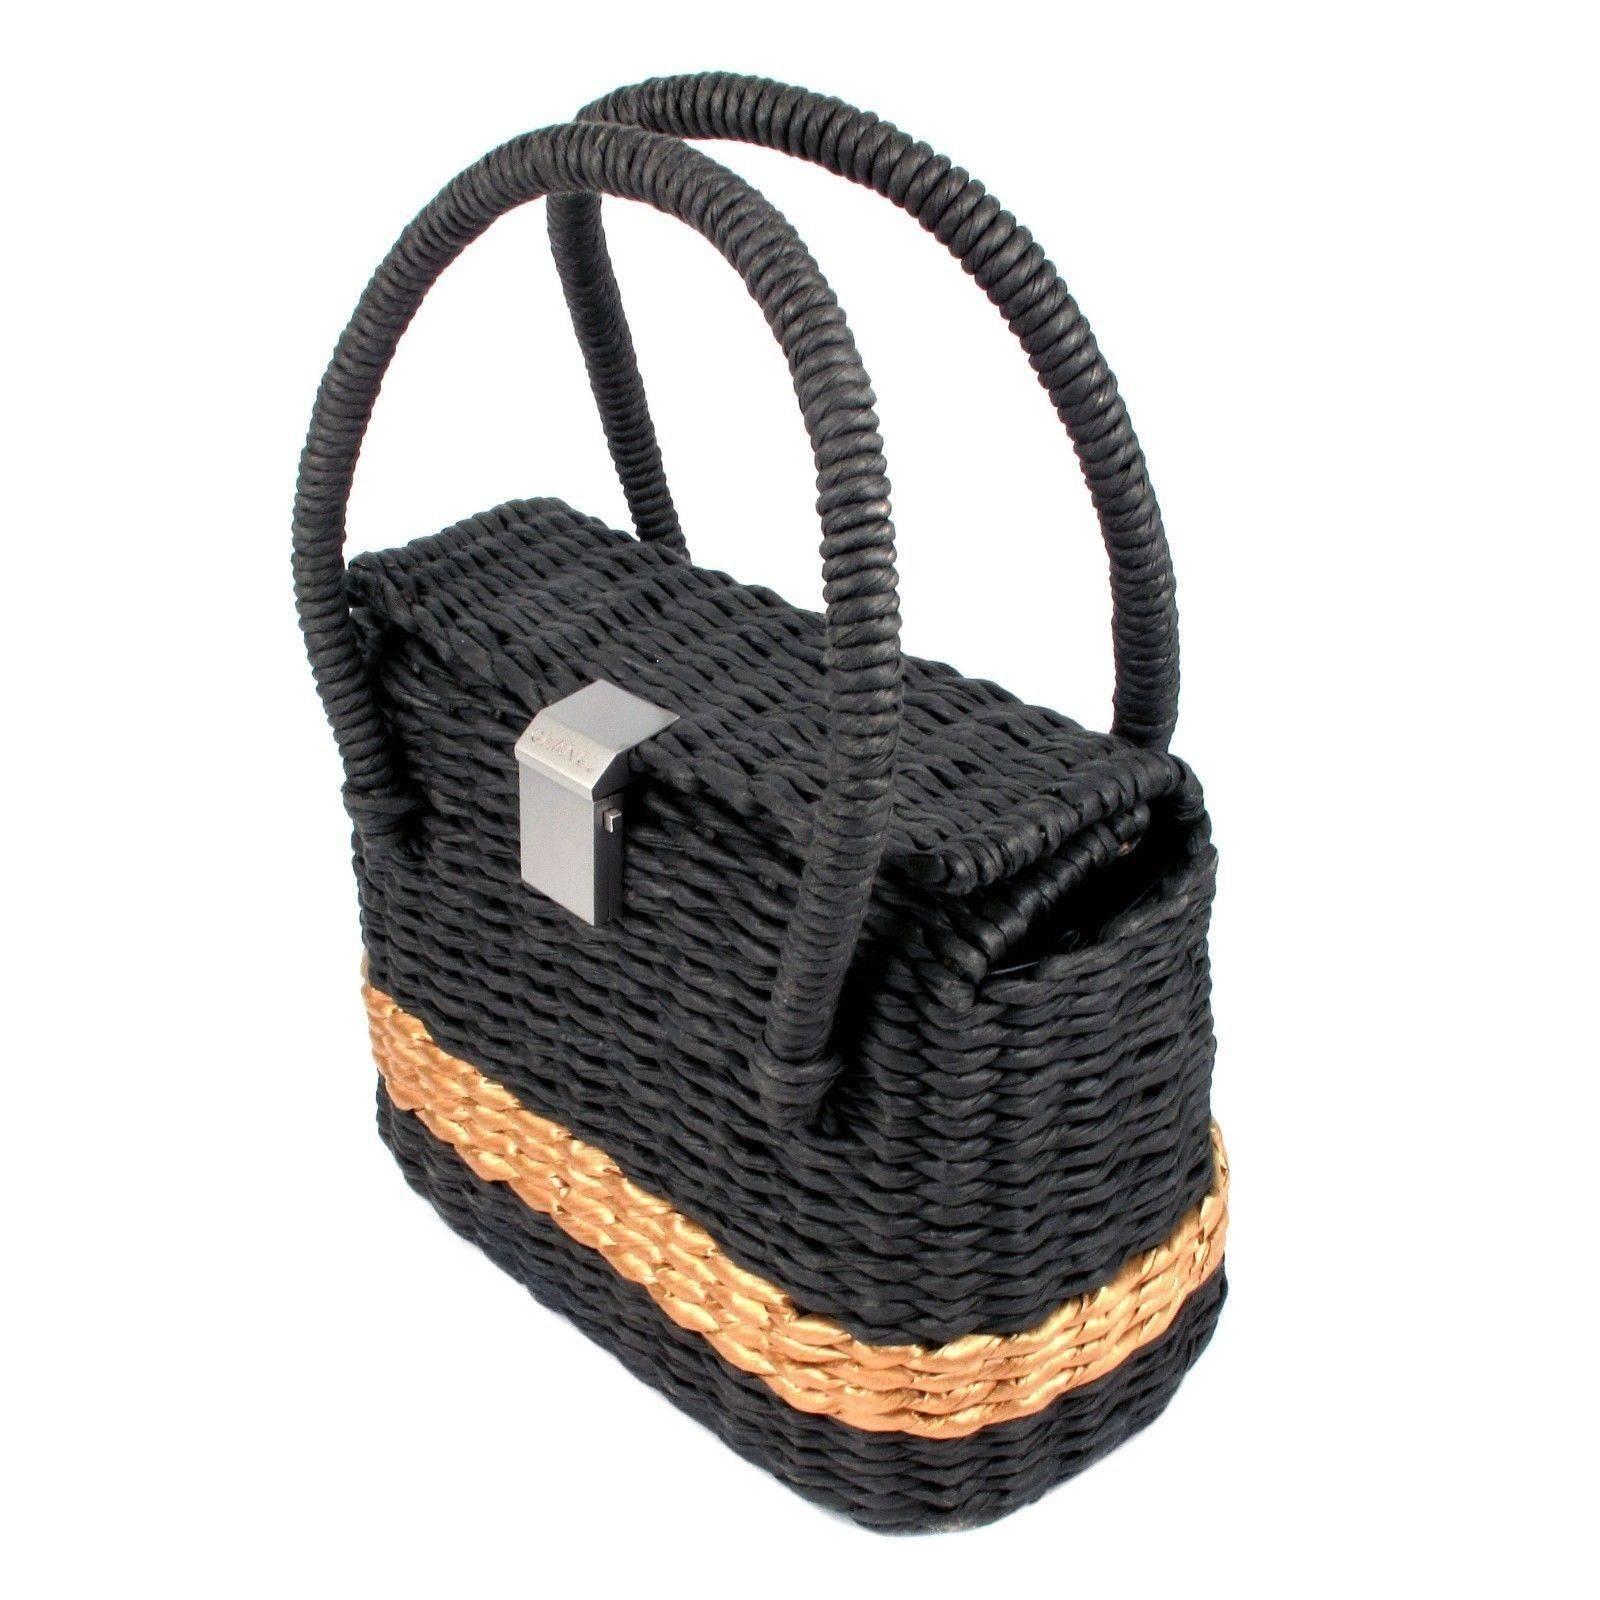 Chanel - Straw Bucket Raffia Tote Bag

Rare Highly Collectable Handbag

Color: Gray / Tan

Material: Straw + Leather

------------------------------------------------------------

Details:

- leather interior lining

- tan stripe